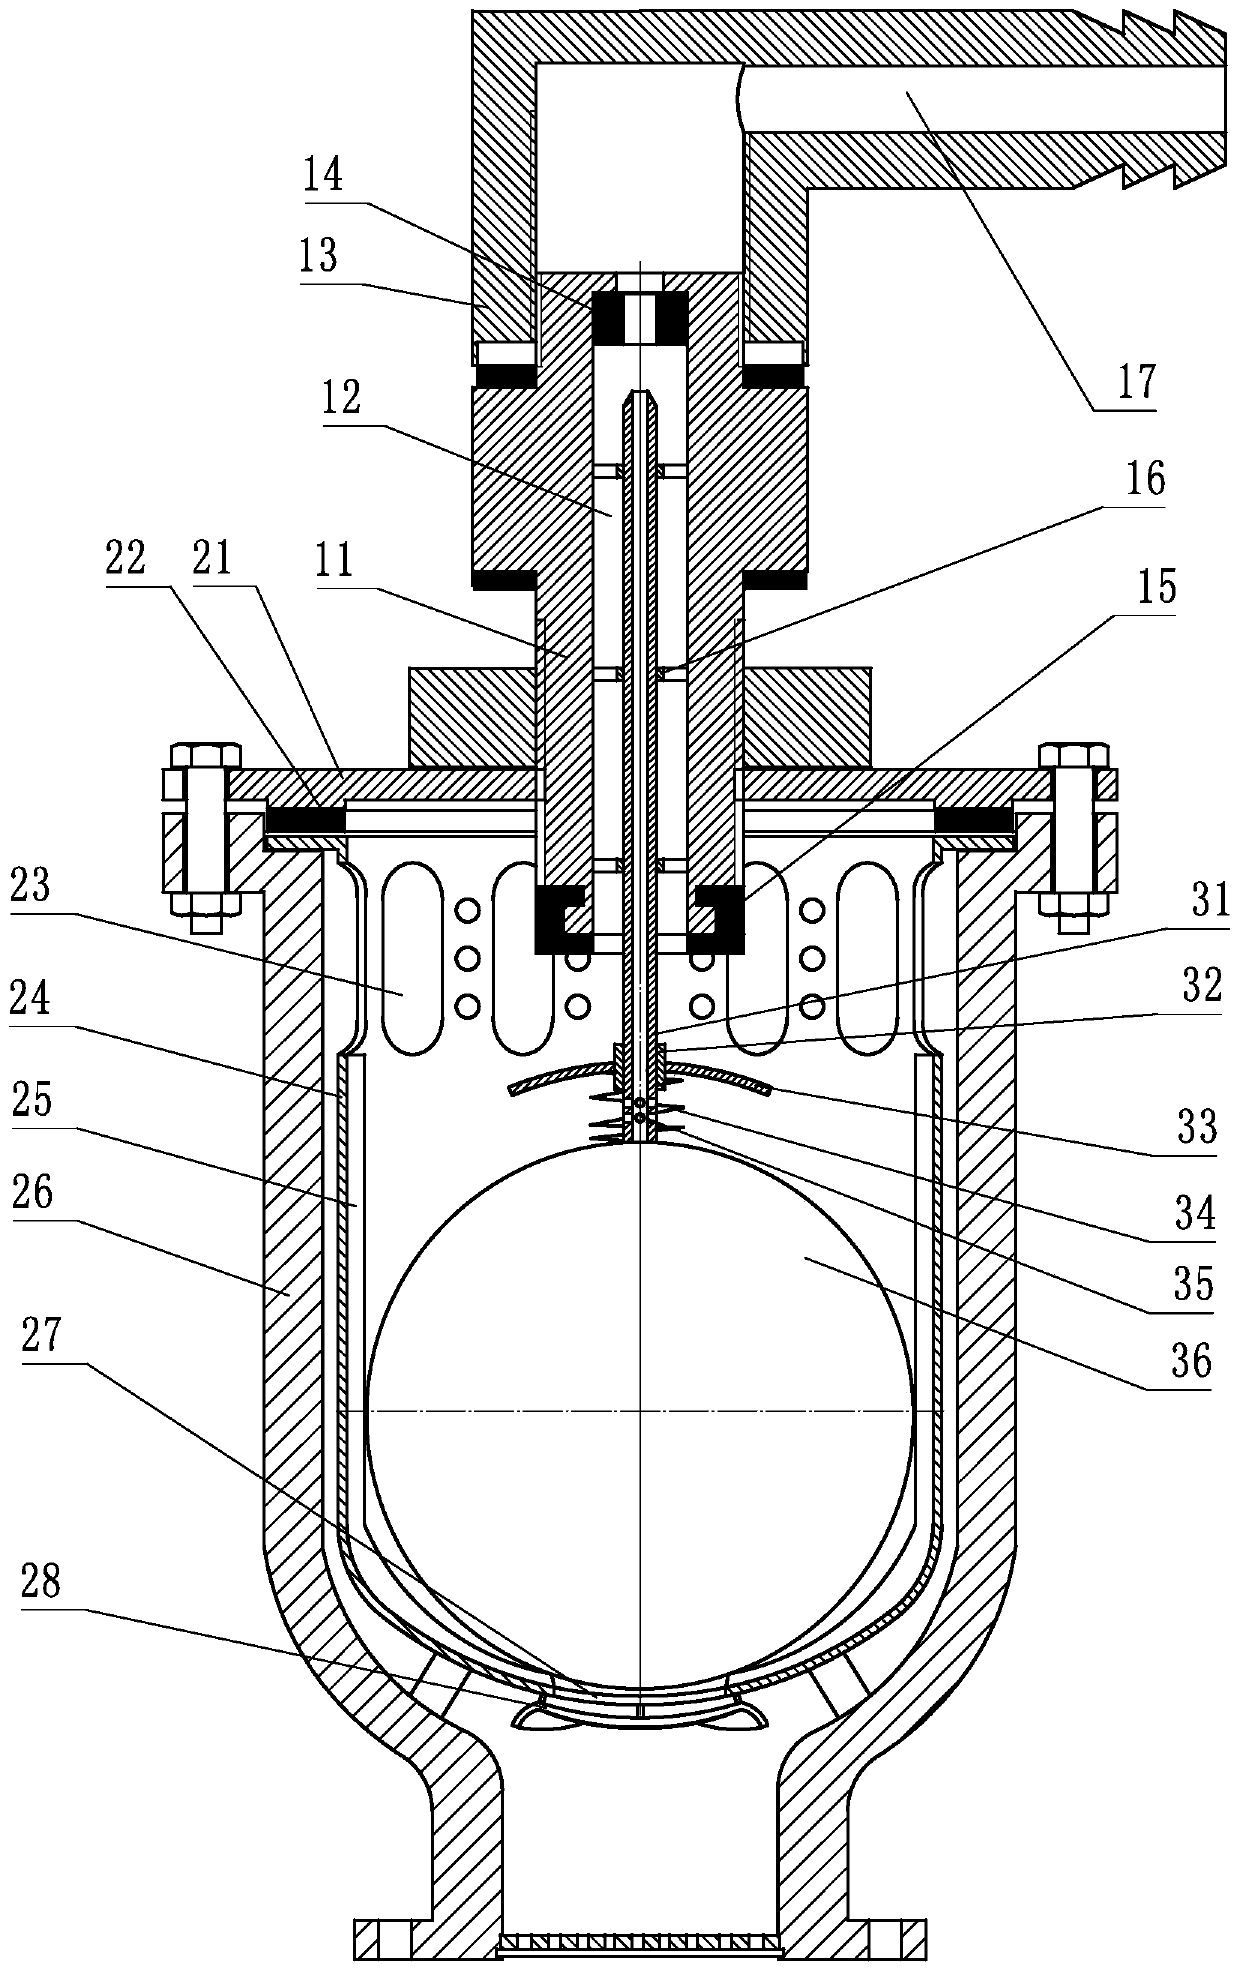 Precise composite suction and exhaust valve